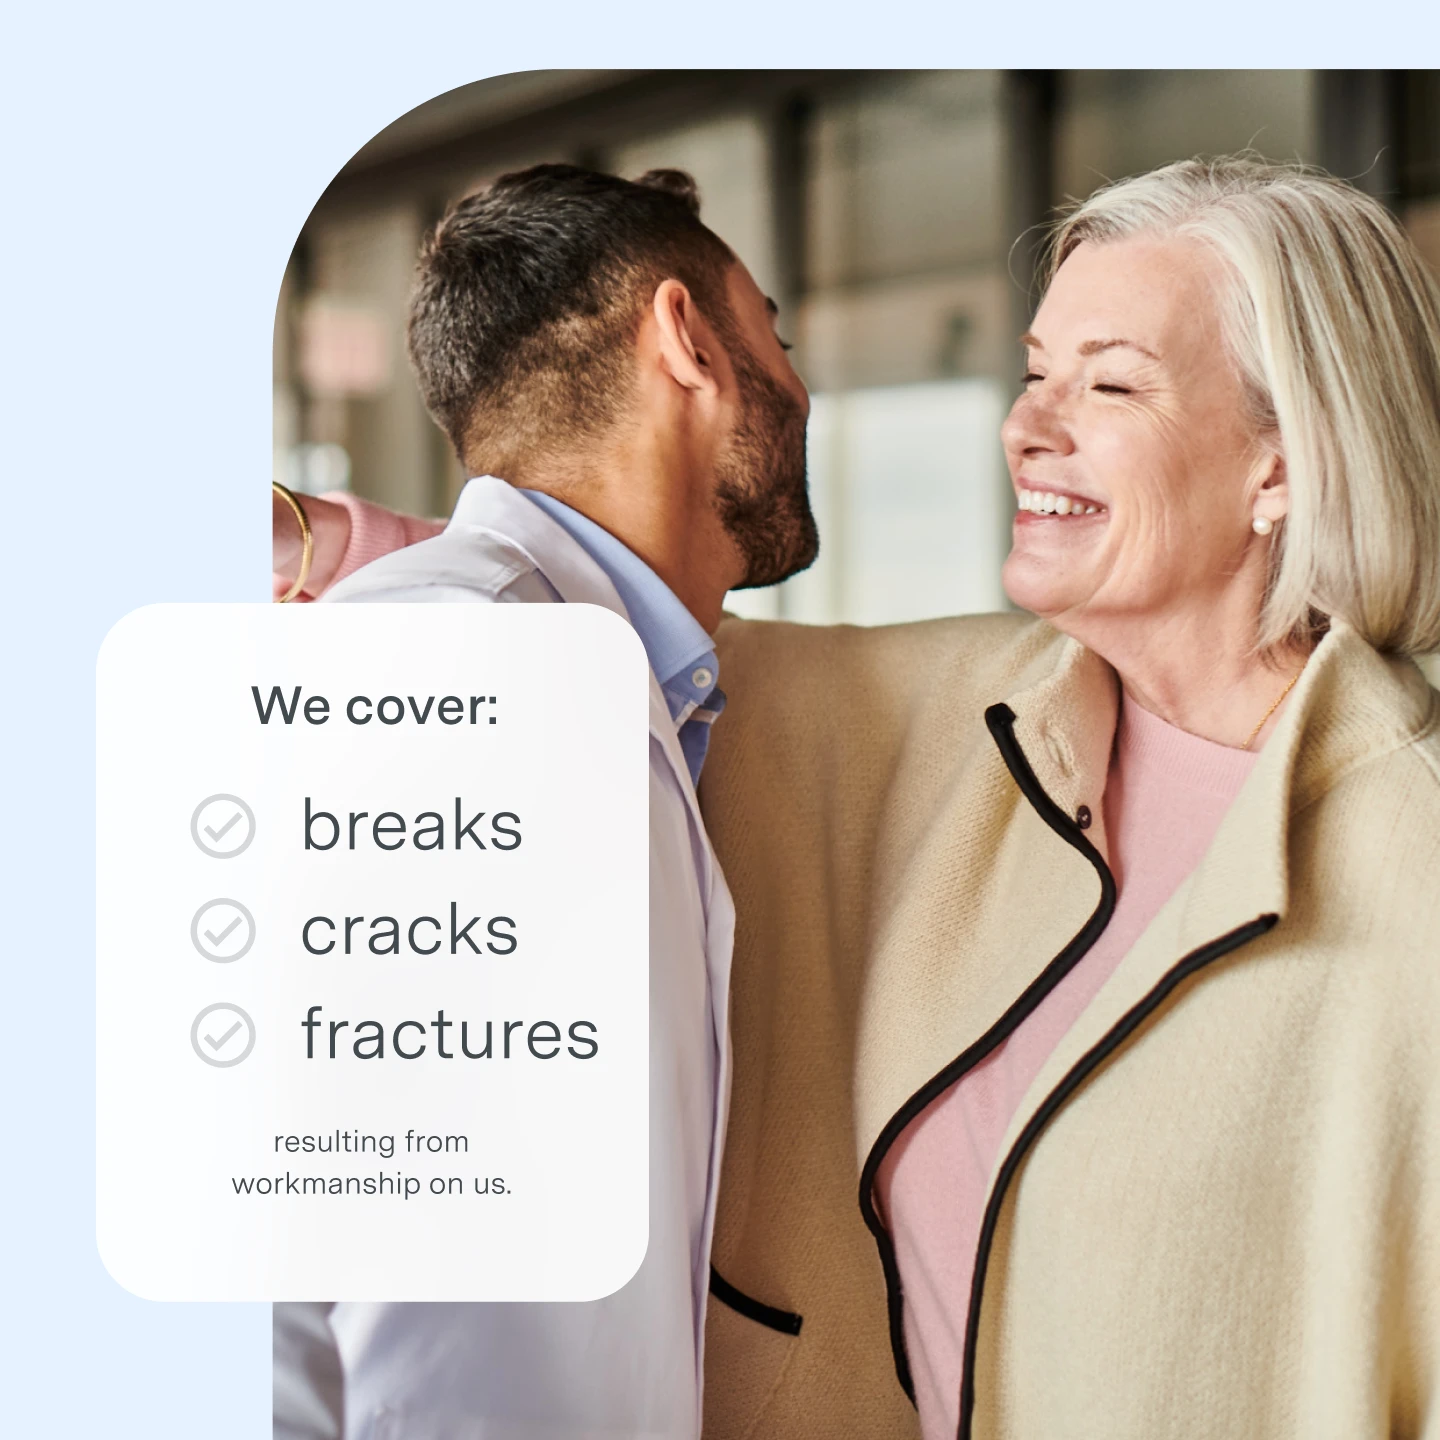 We cover: Breaks, cracks, and fractures. 